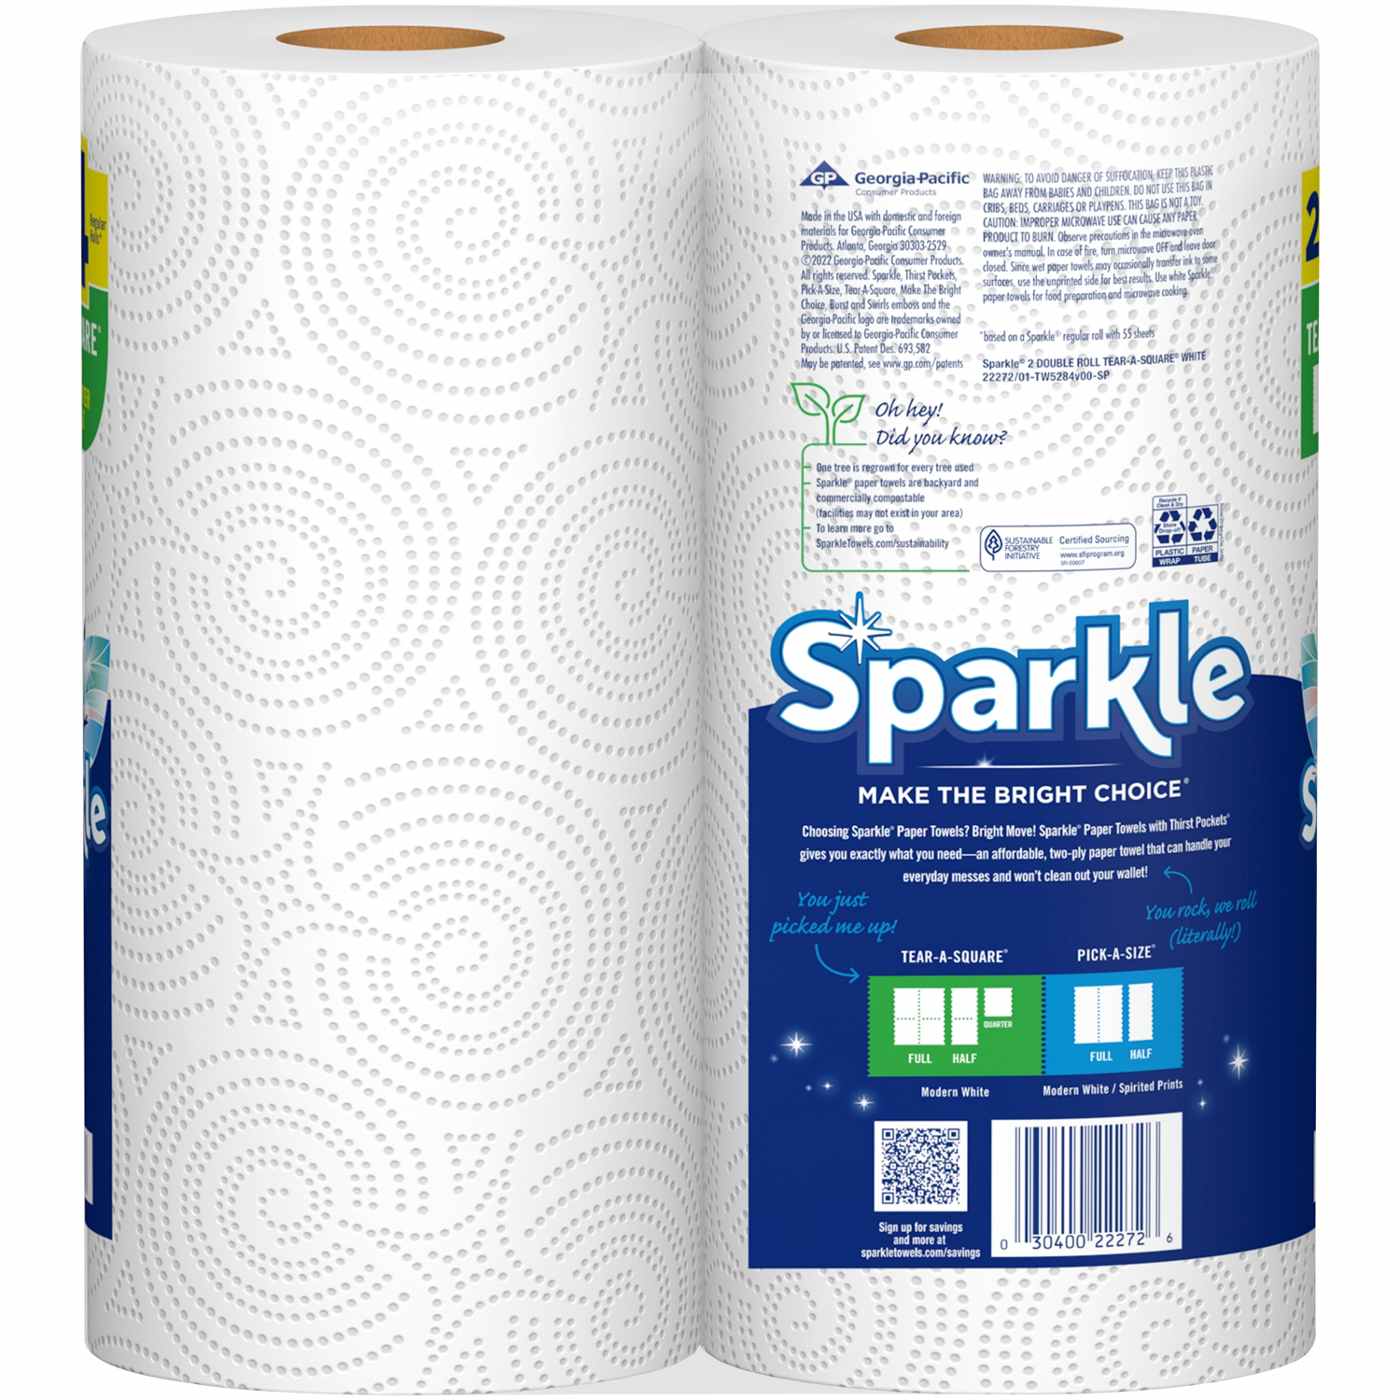 Sparkle Tear-A-Square Double Rolls Paper Towels with Thirst Pockets; image 2 of 2